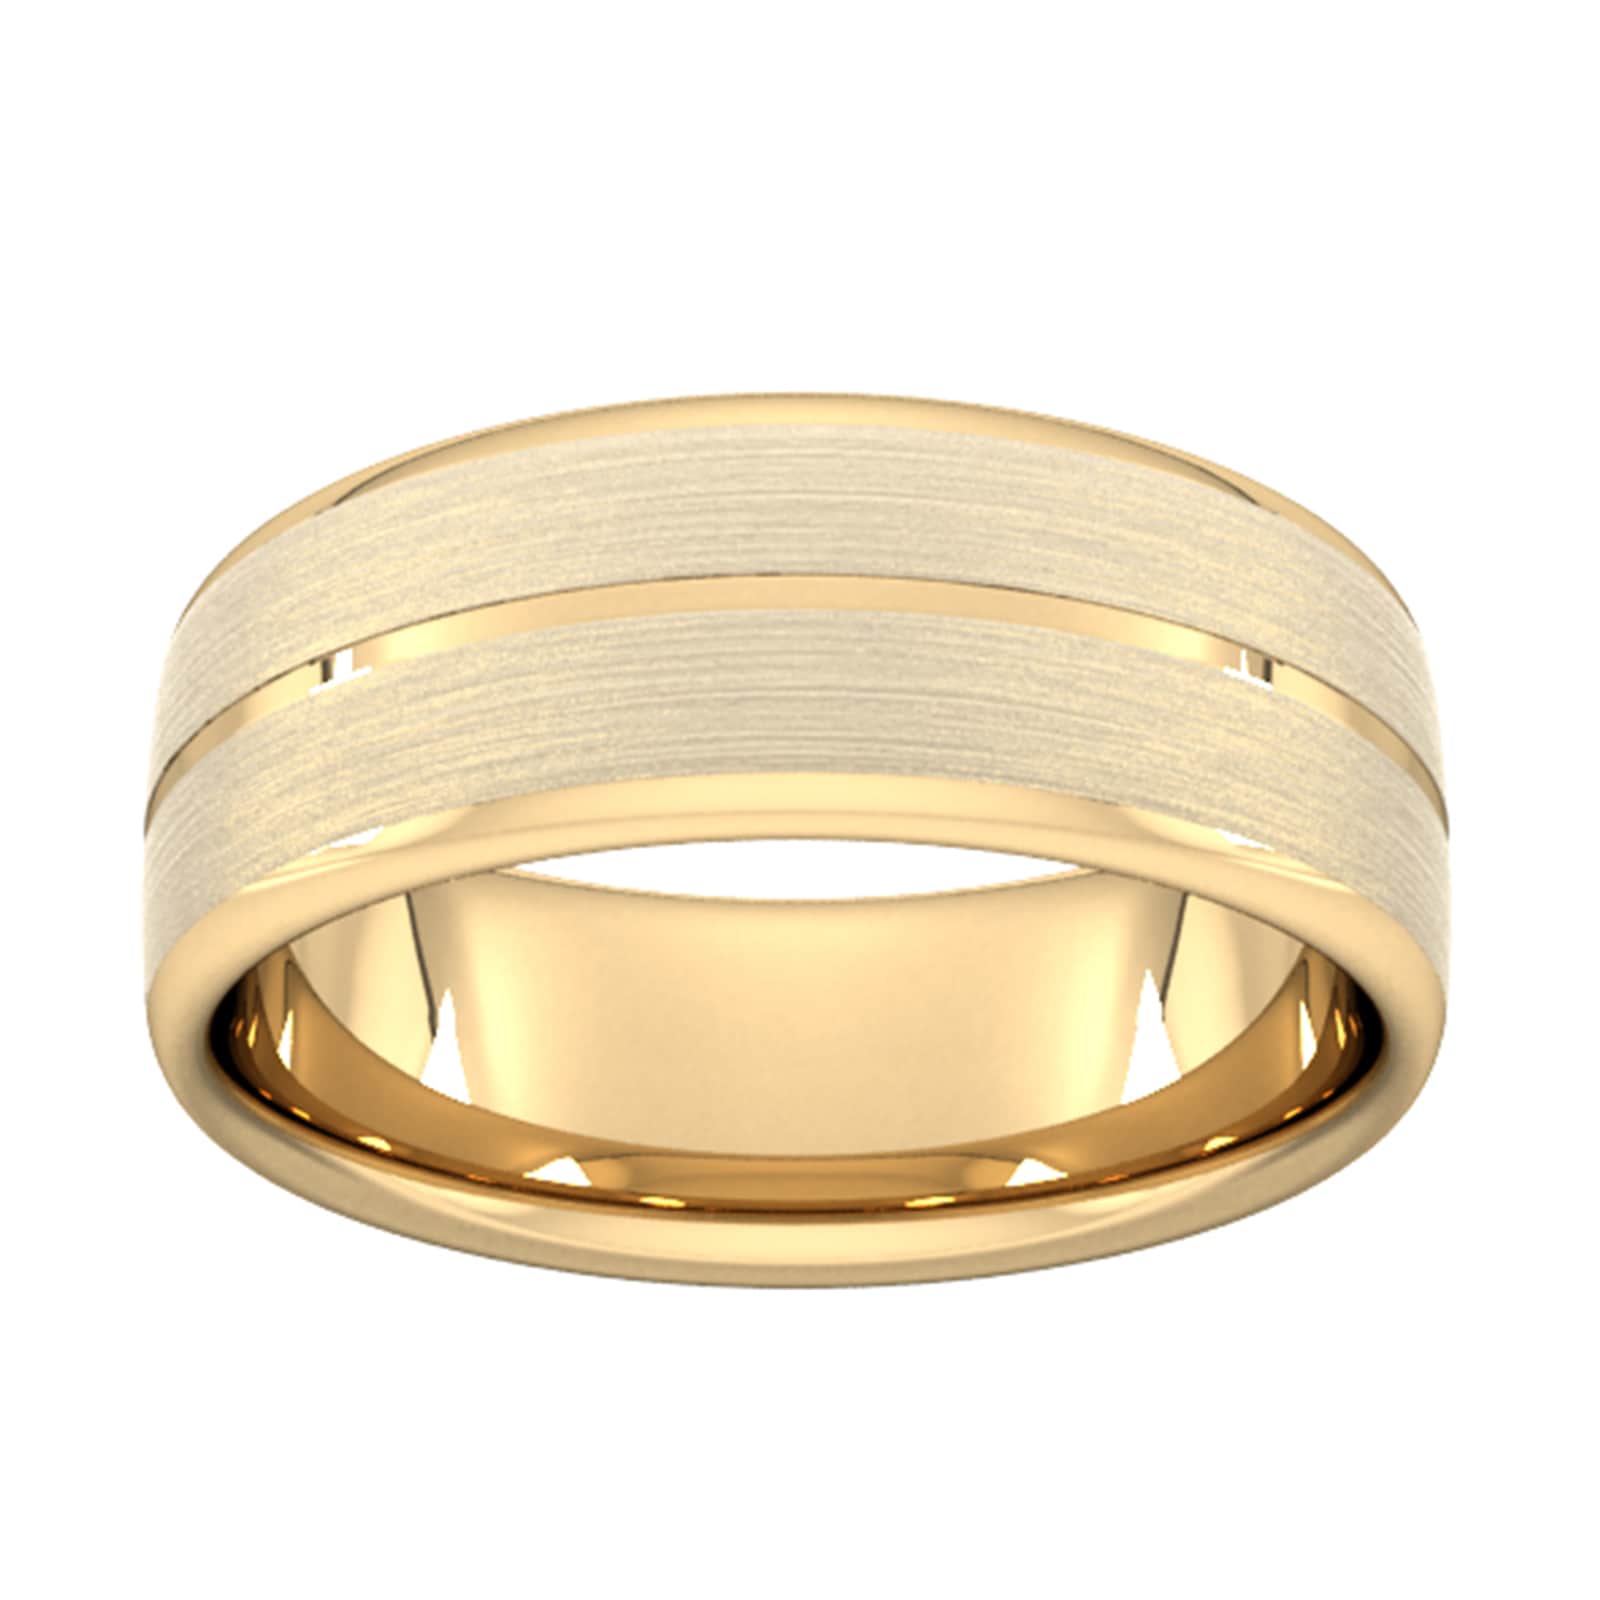 8mm Traditional Court Standard Centre Groove With Chamfered Edge Wedding Ring In 18 Carat Yellow Gold - Ring Size S